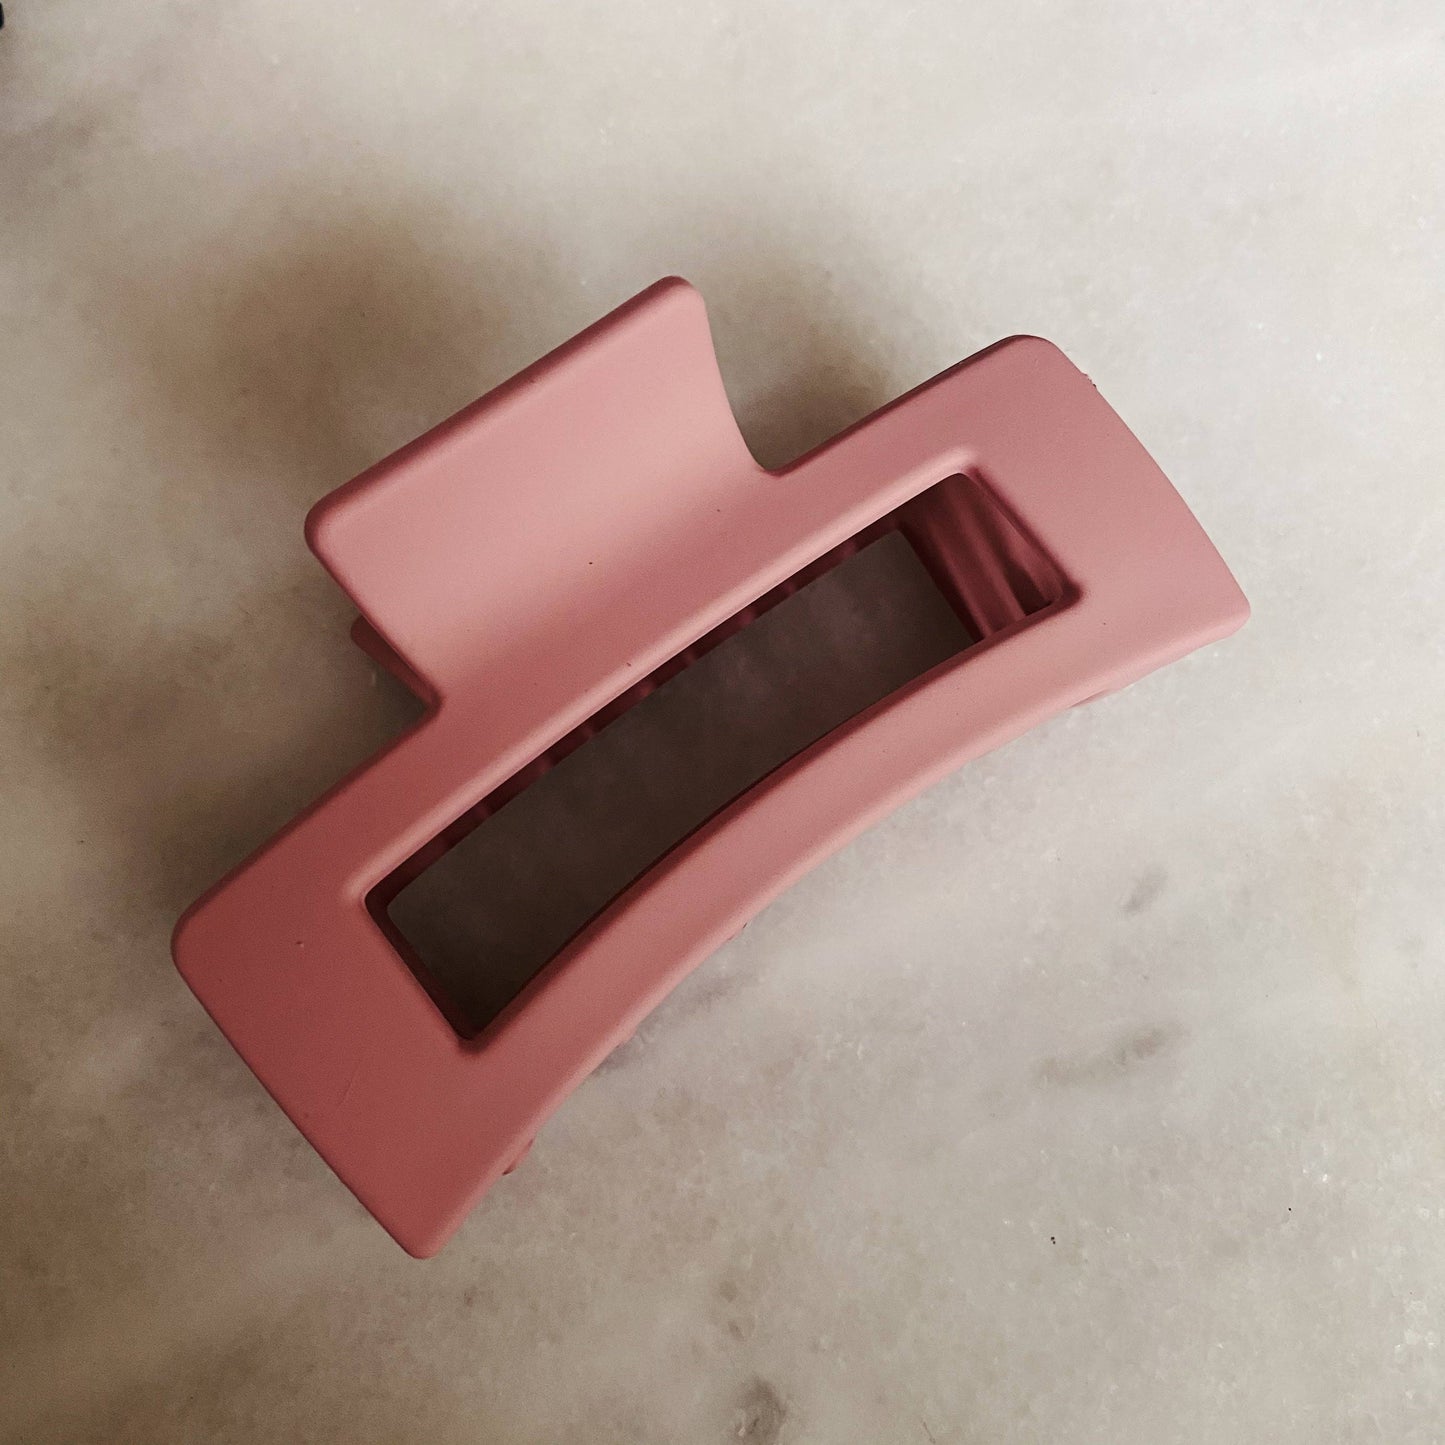 Pink Square Claw Clips